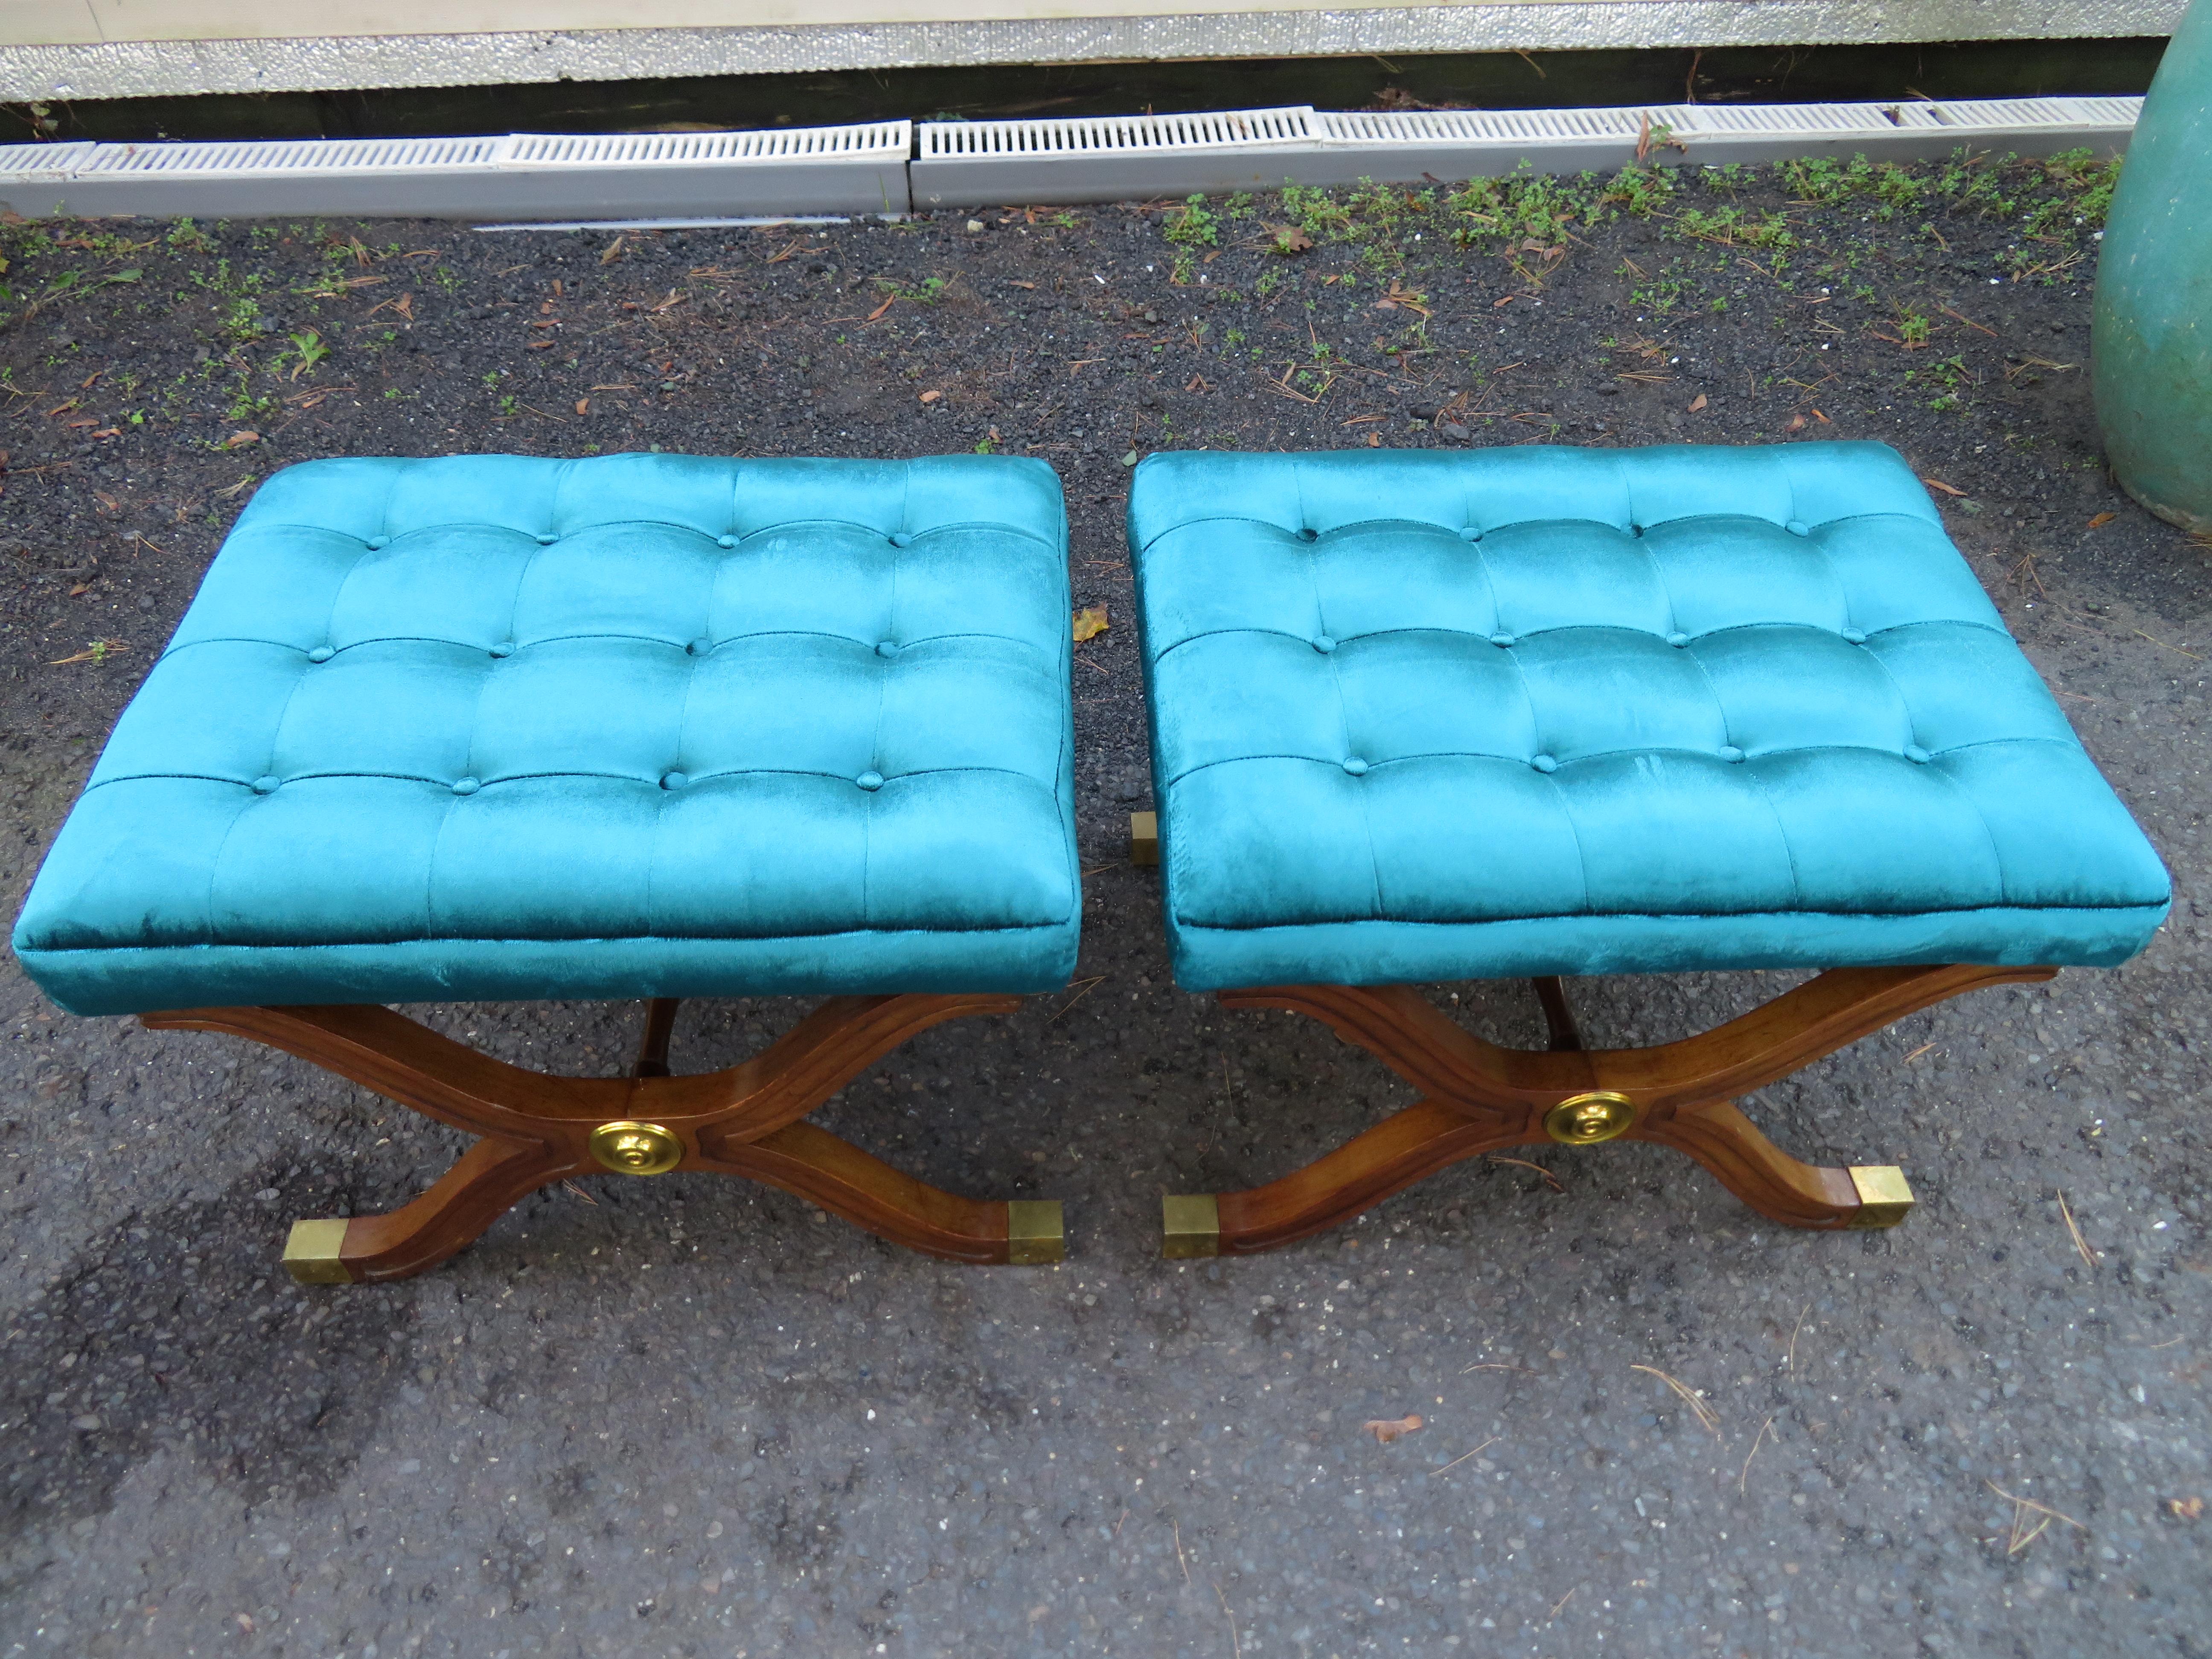 Magnificent pair of Dorothy Draper Henredon Heritage stools. We had the seats biscuit tufted upholstered in a shimmering peacock blue velvet and they sure look scrumptious! They measure 18